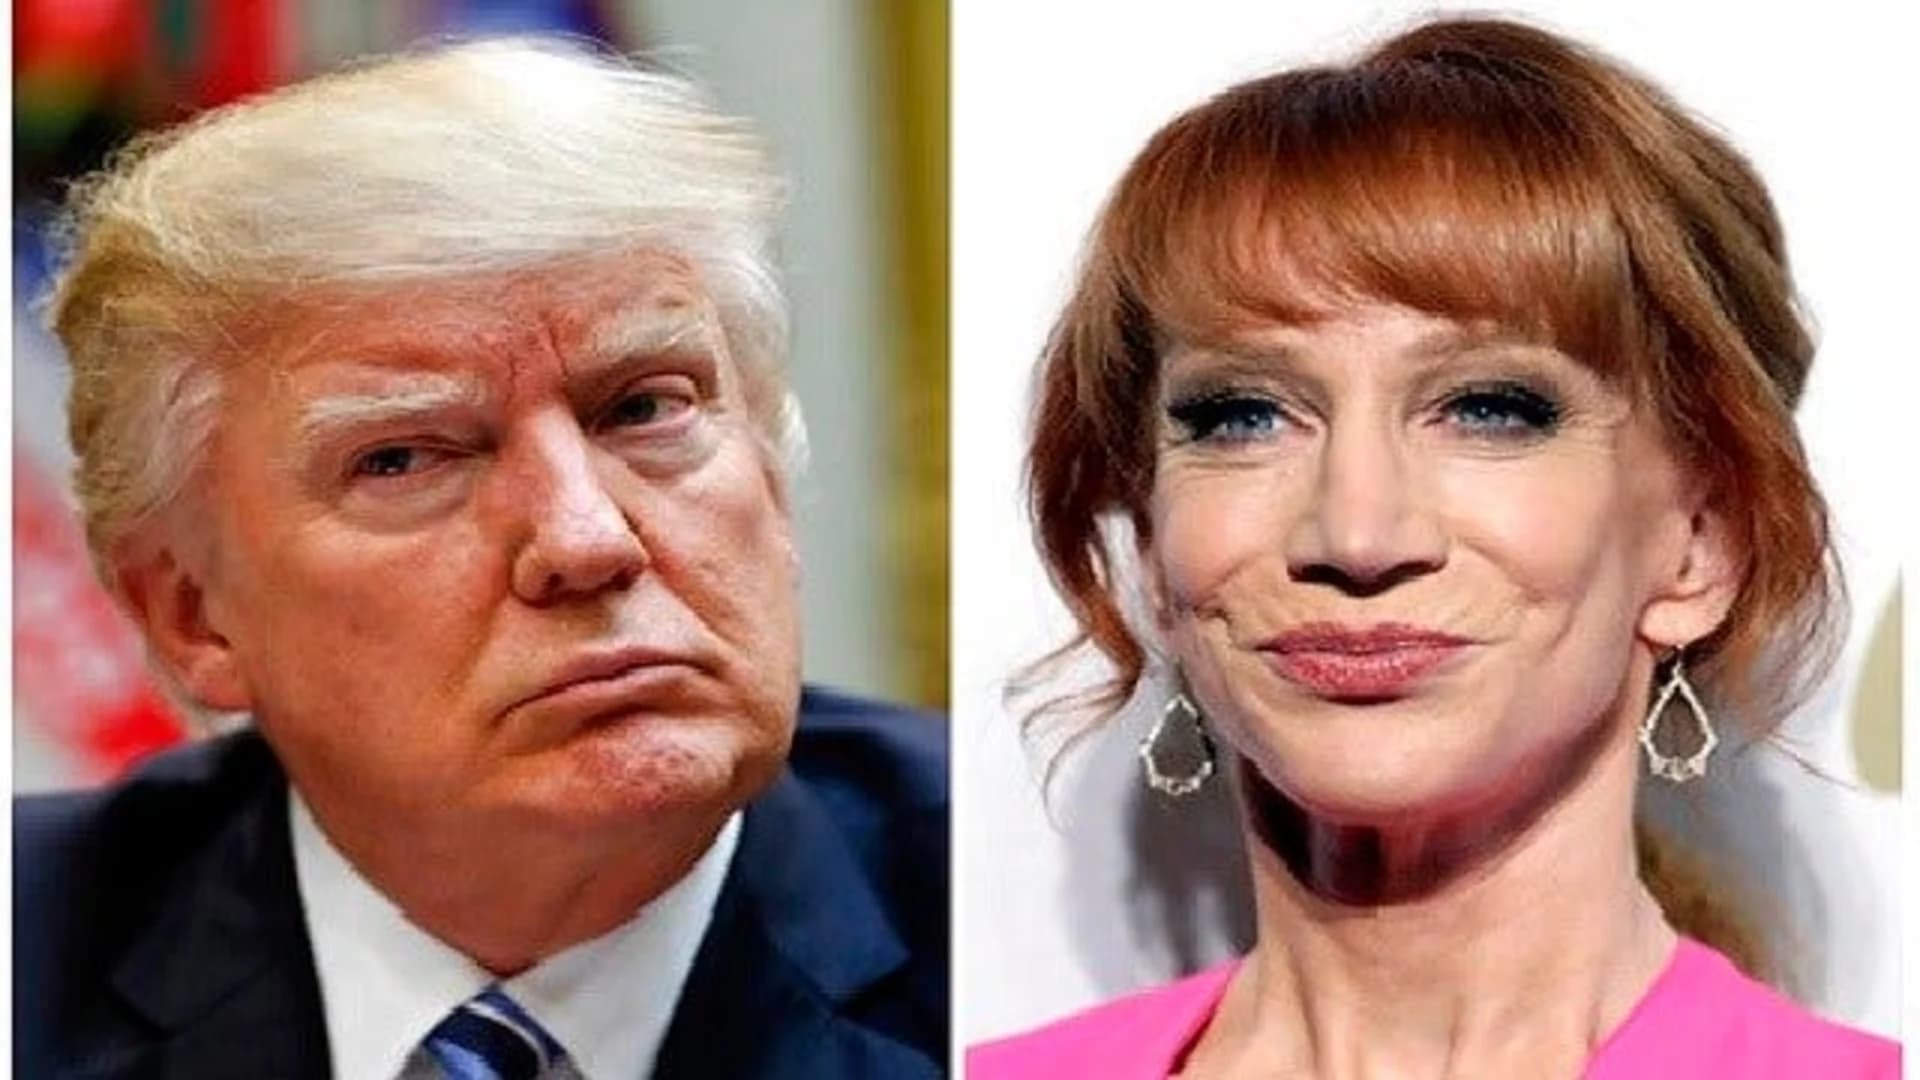 2 NJ theaters cancel Kathy Griffin’s shows amid Trump photo fallout